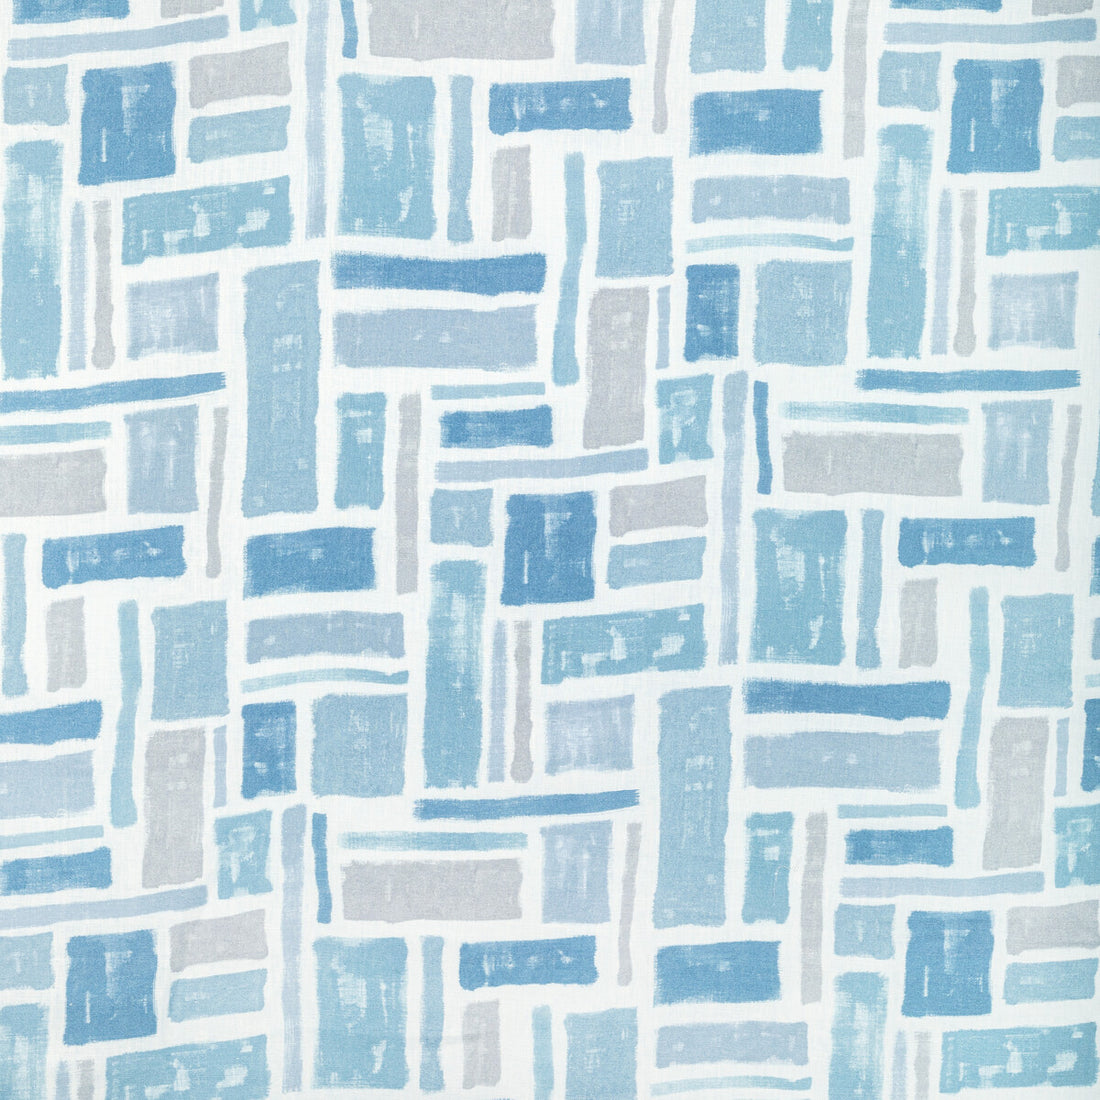 Partington fabric in pacific color - pattern PARTINGTON.5.0 - by Kravet Design in the Jeffrey Alan Marks Seascapes collection